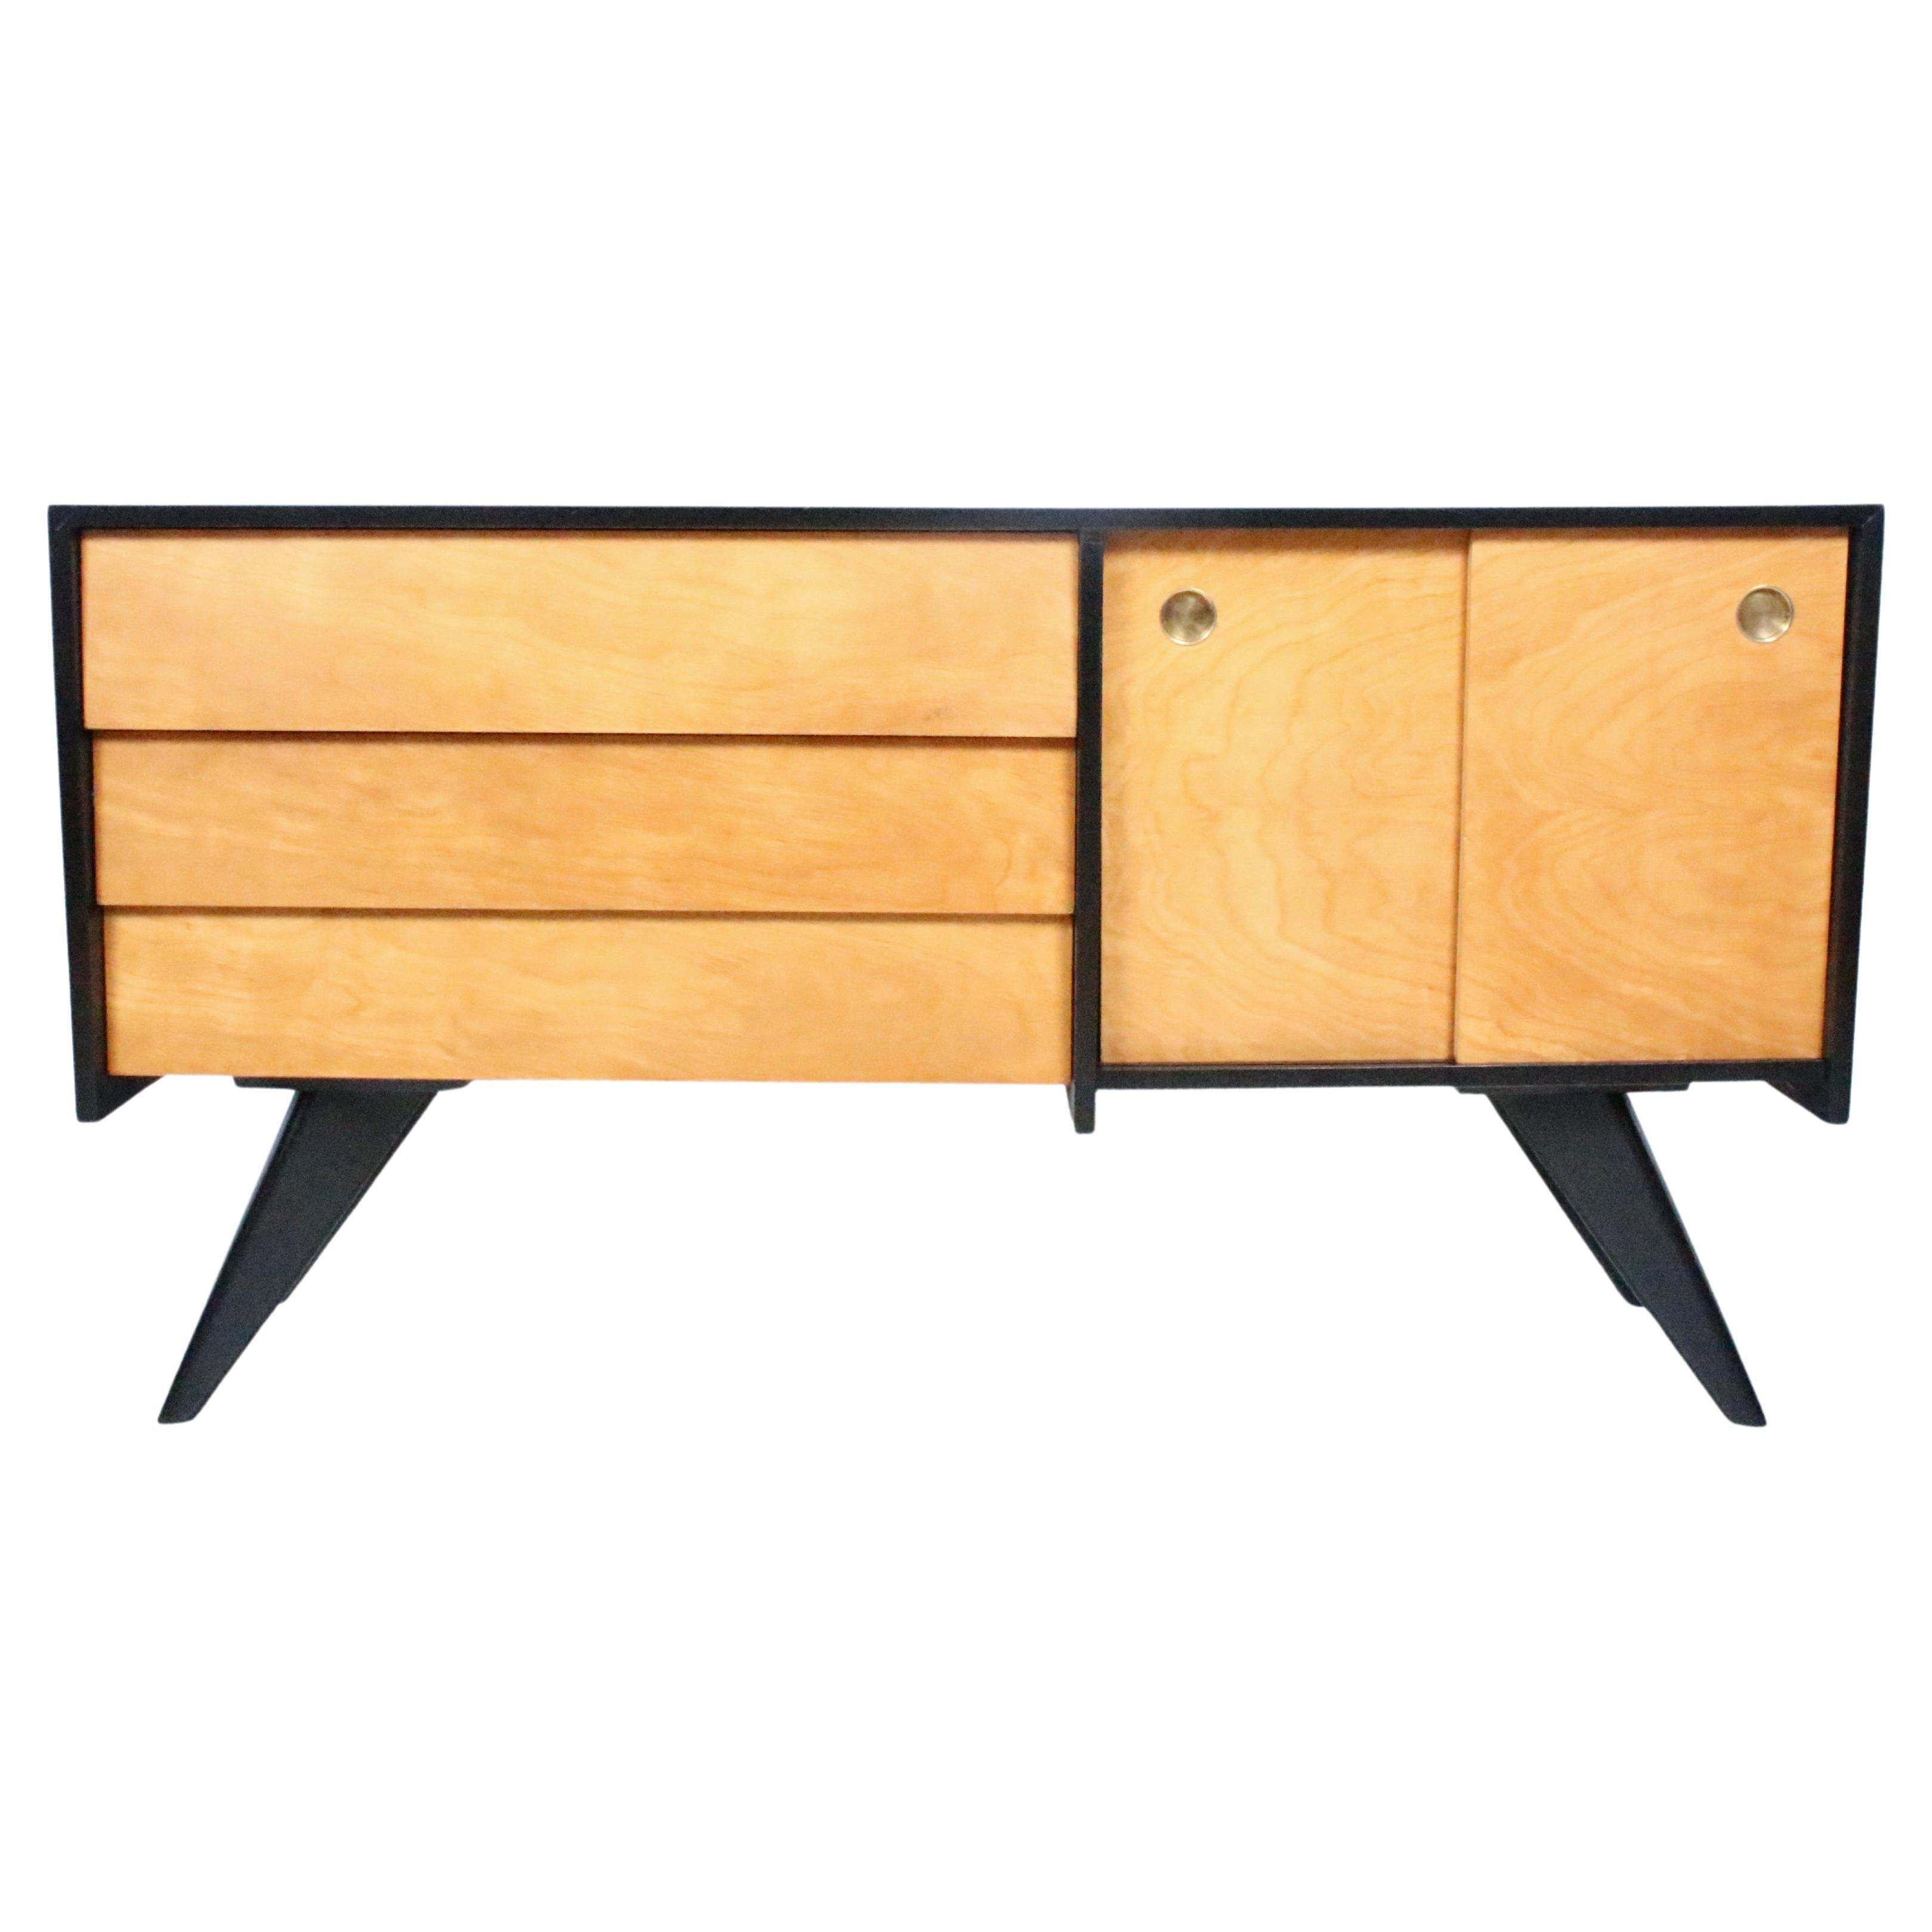 Russell Spanner Black Lacquer & Blonde Maple "Catalina" Credenza, 1950's For Sale